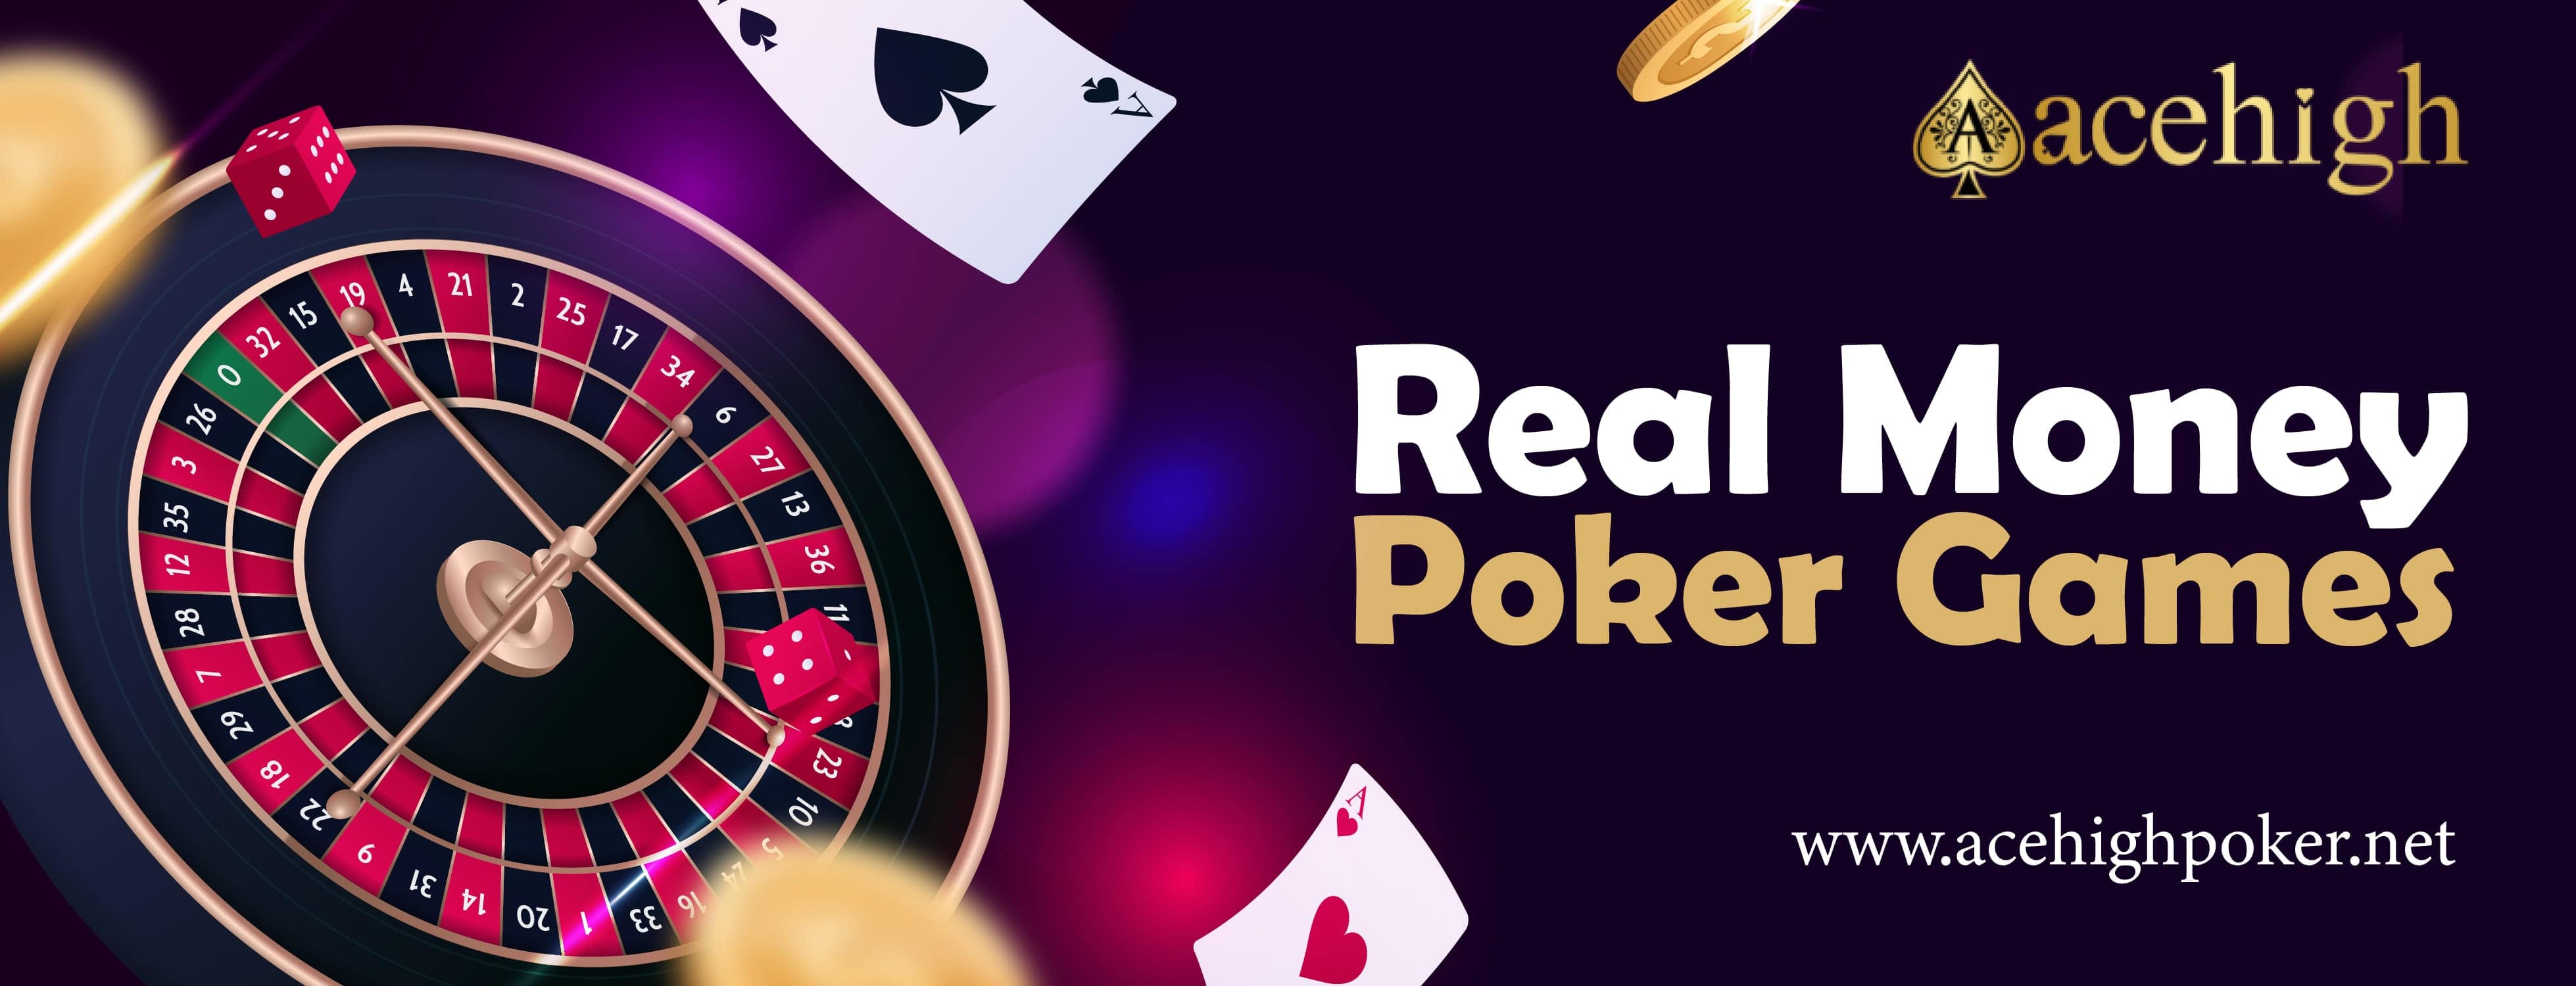 Real Money Poker Games: A Complete Guide to Online Gambling Success - AceHigh Poker